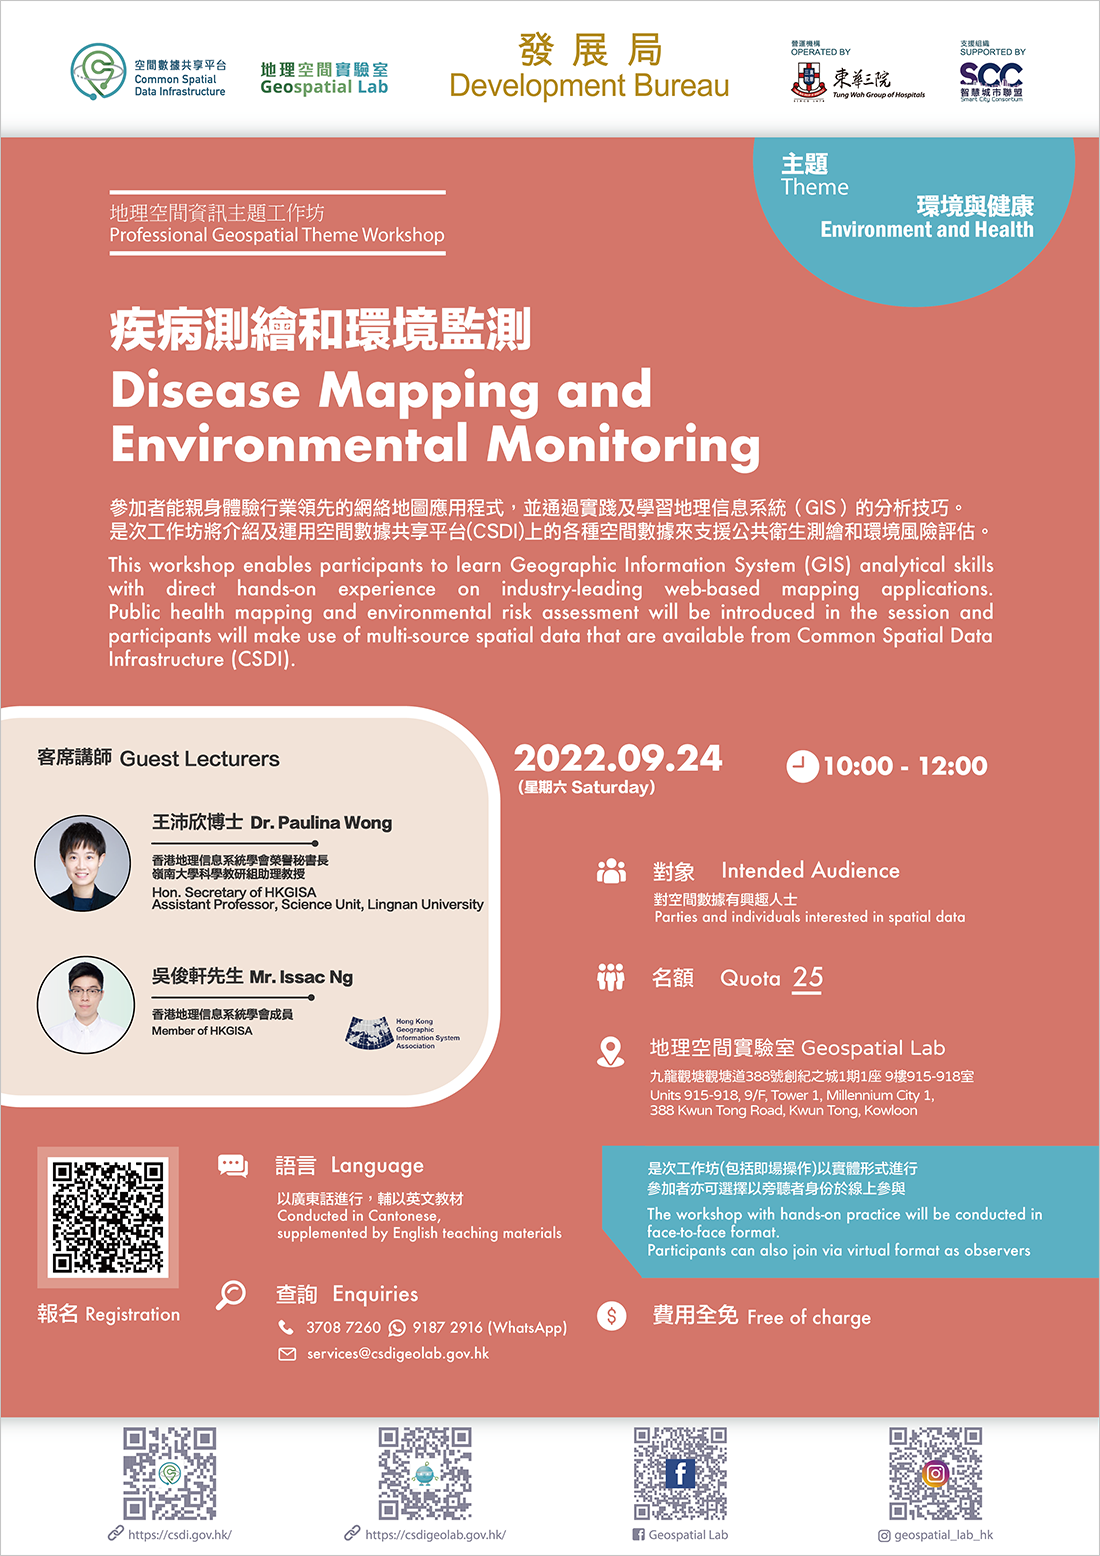 Post of Professional Geospatial Theme Workshop - Disease Mapping and Environmental Monitoring